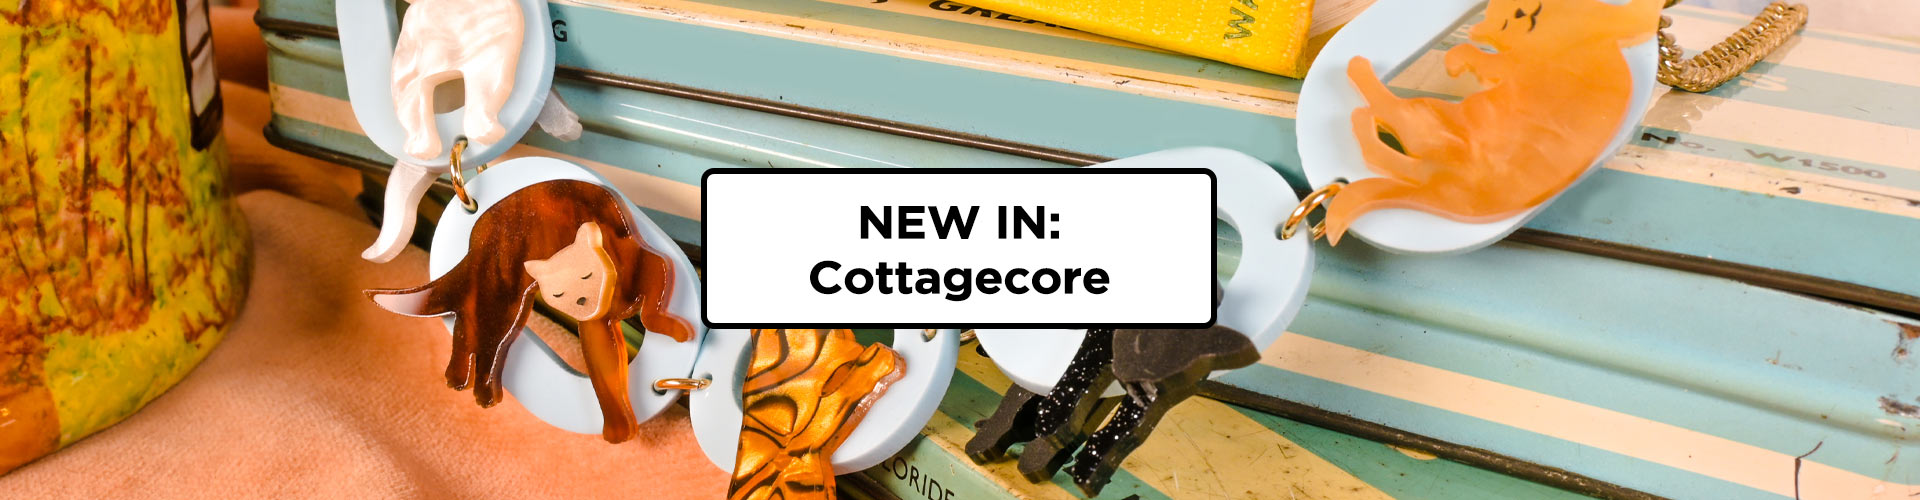 NEW IN: Cottagecore